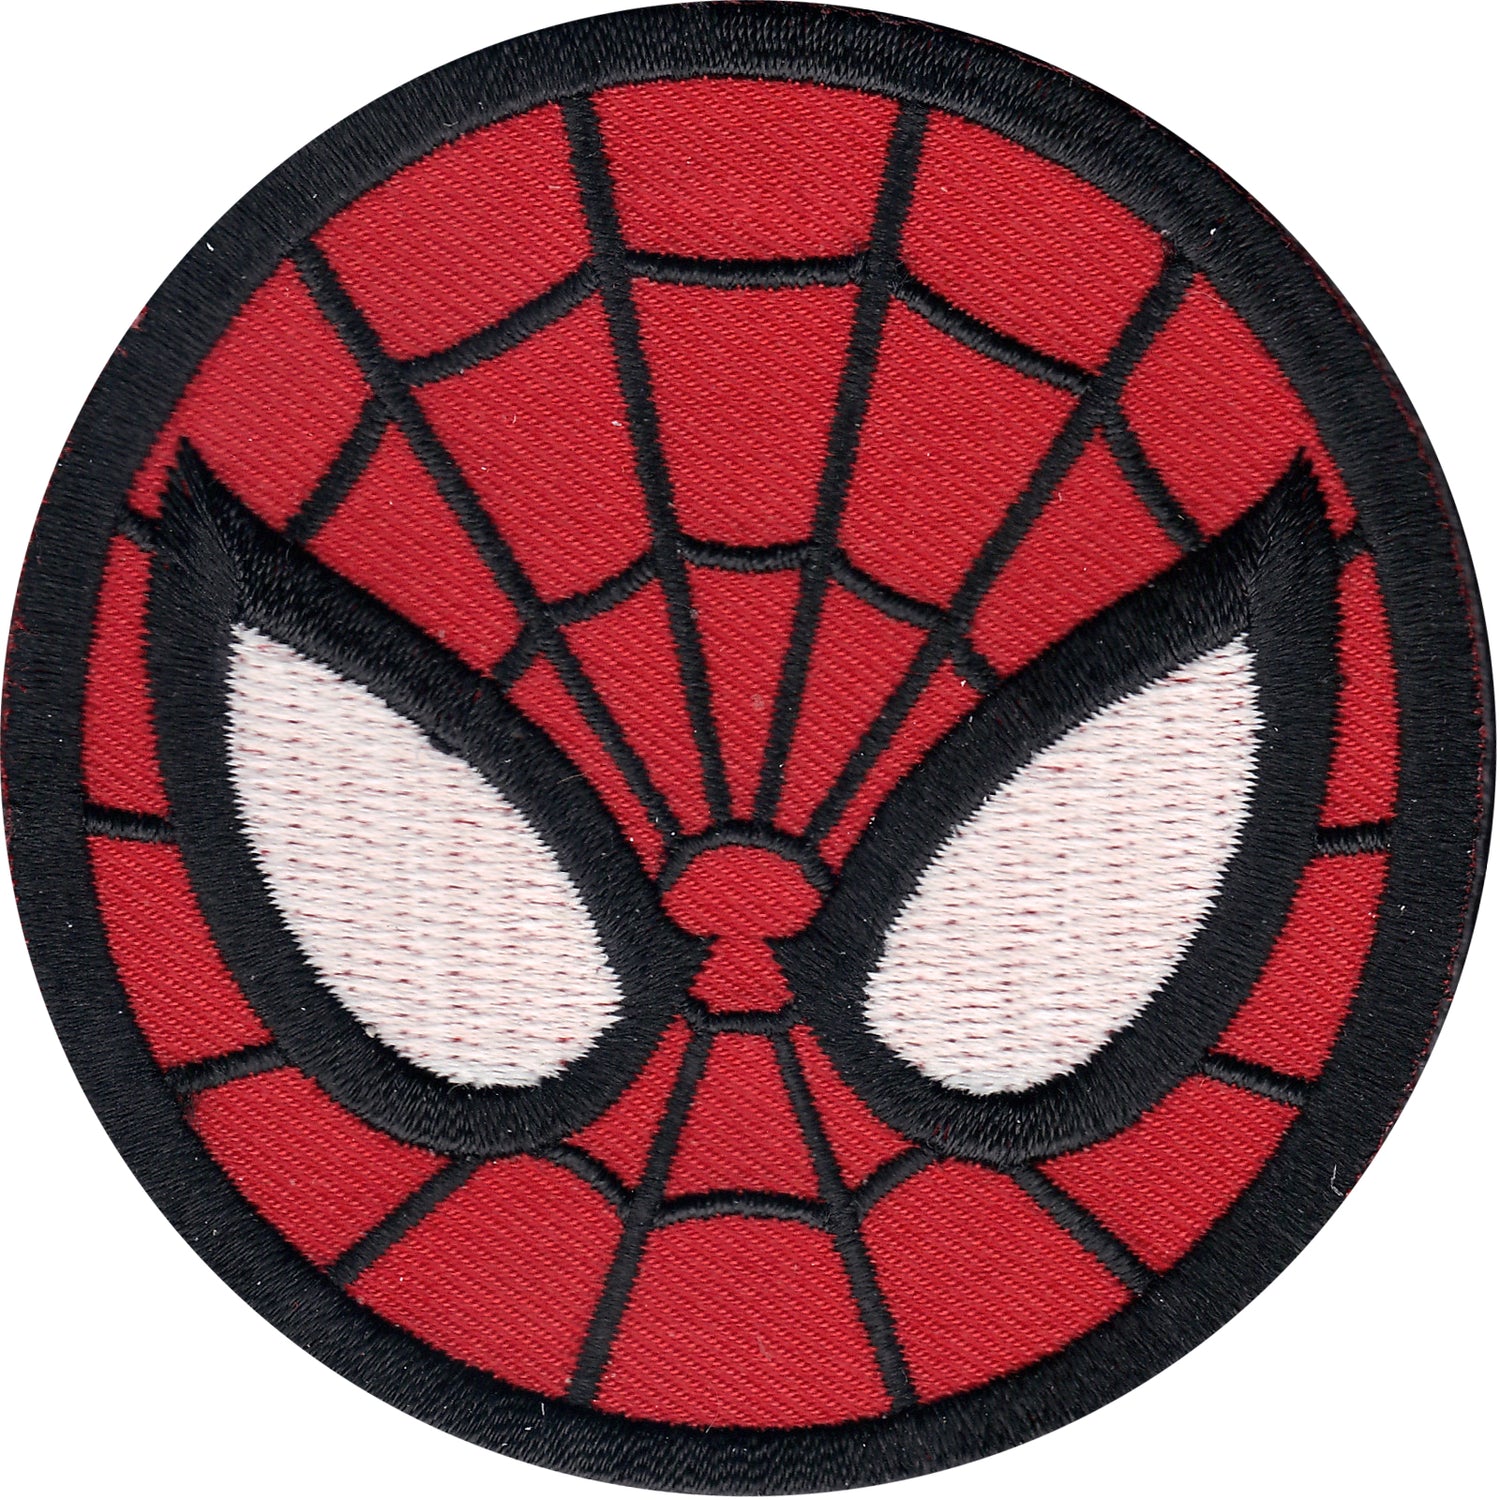 ➤ Iron on Patch Spiderman chibi  FREAKY SHOP WORLD – Freaky Shop World USA  - iron on Patches and Pins